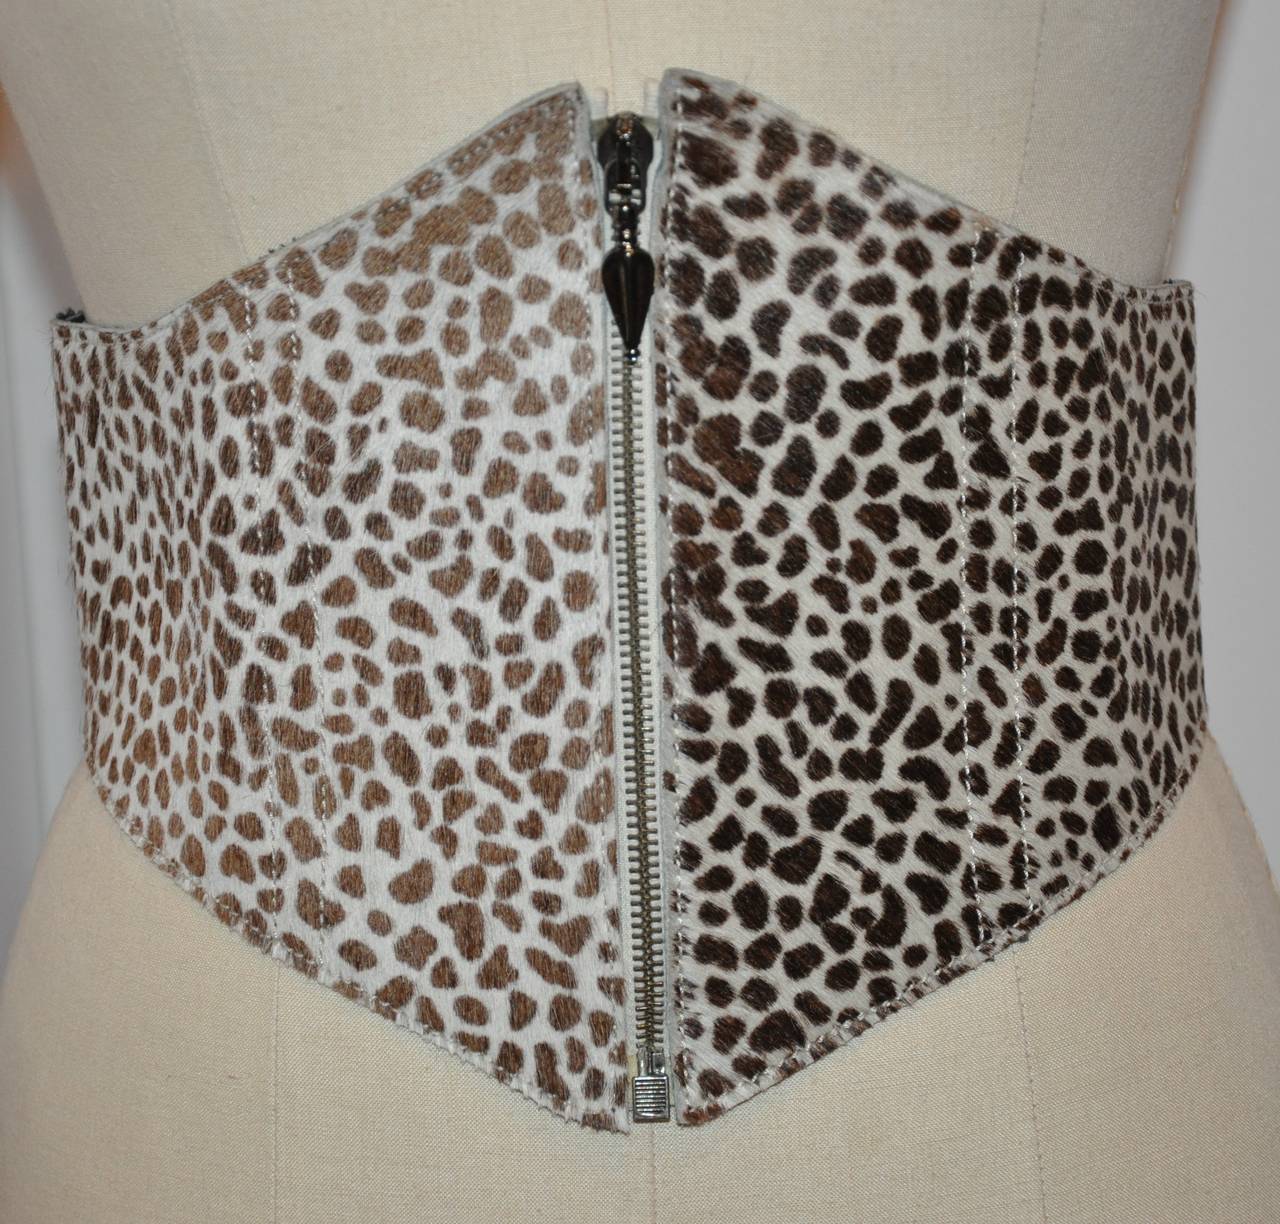 Ozbek leopard print in colors of browns and cream. Pony-skin zipper belt is fully lined with black leather. The widest width measures 8 1/2